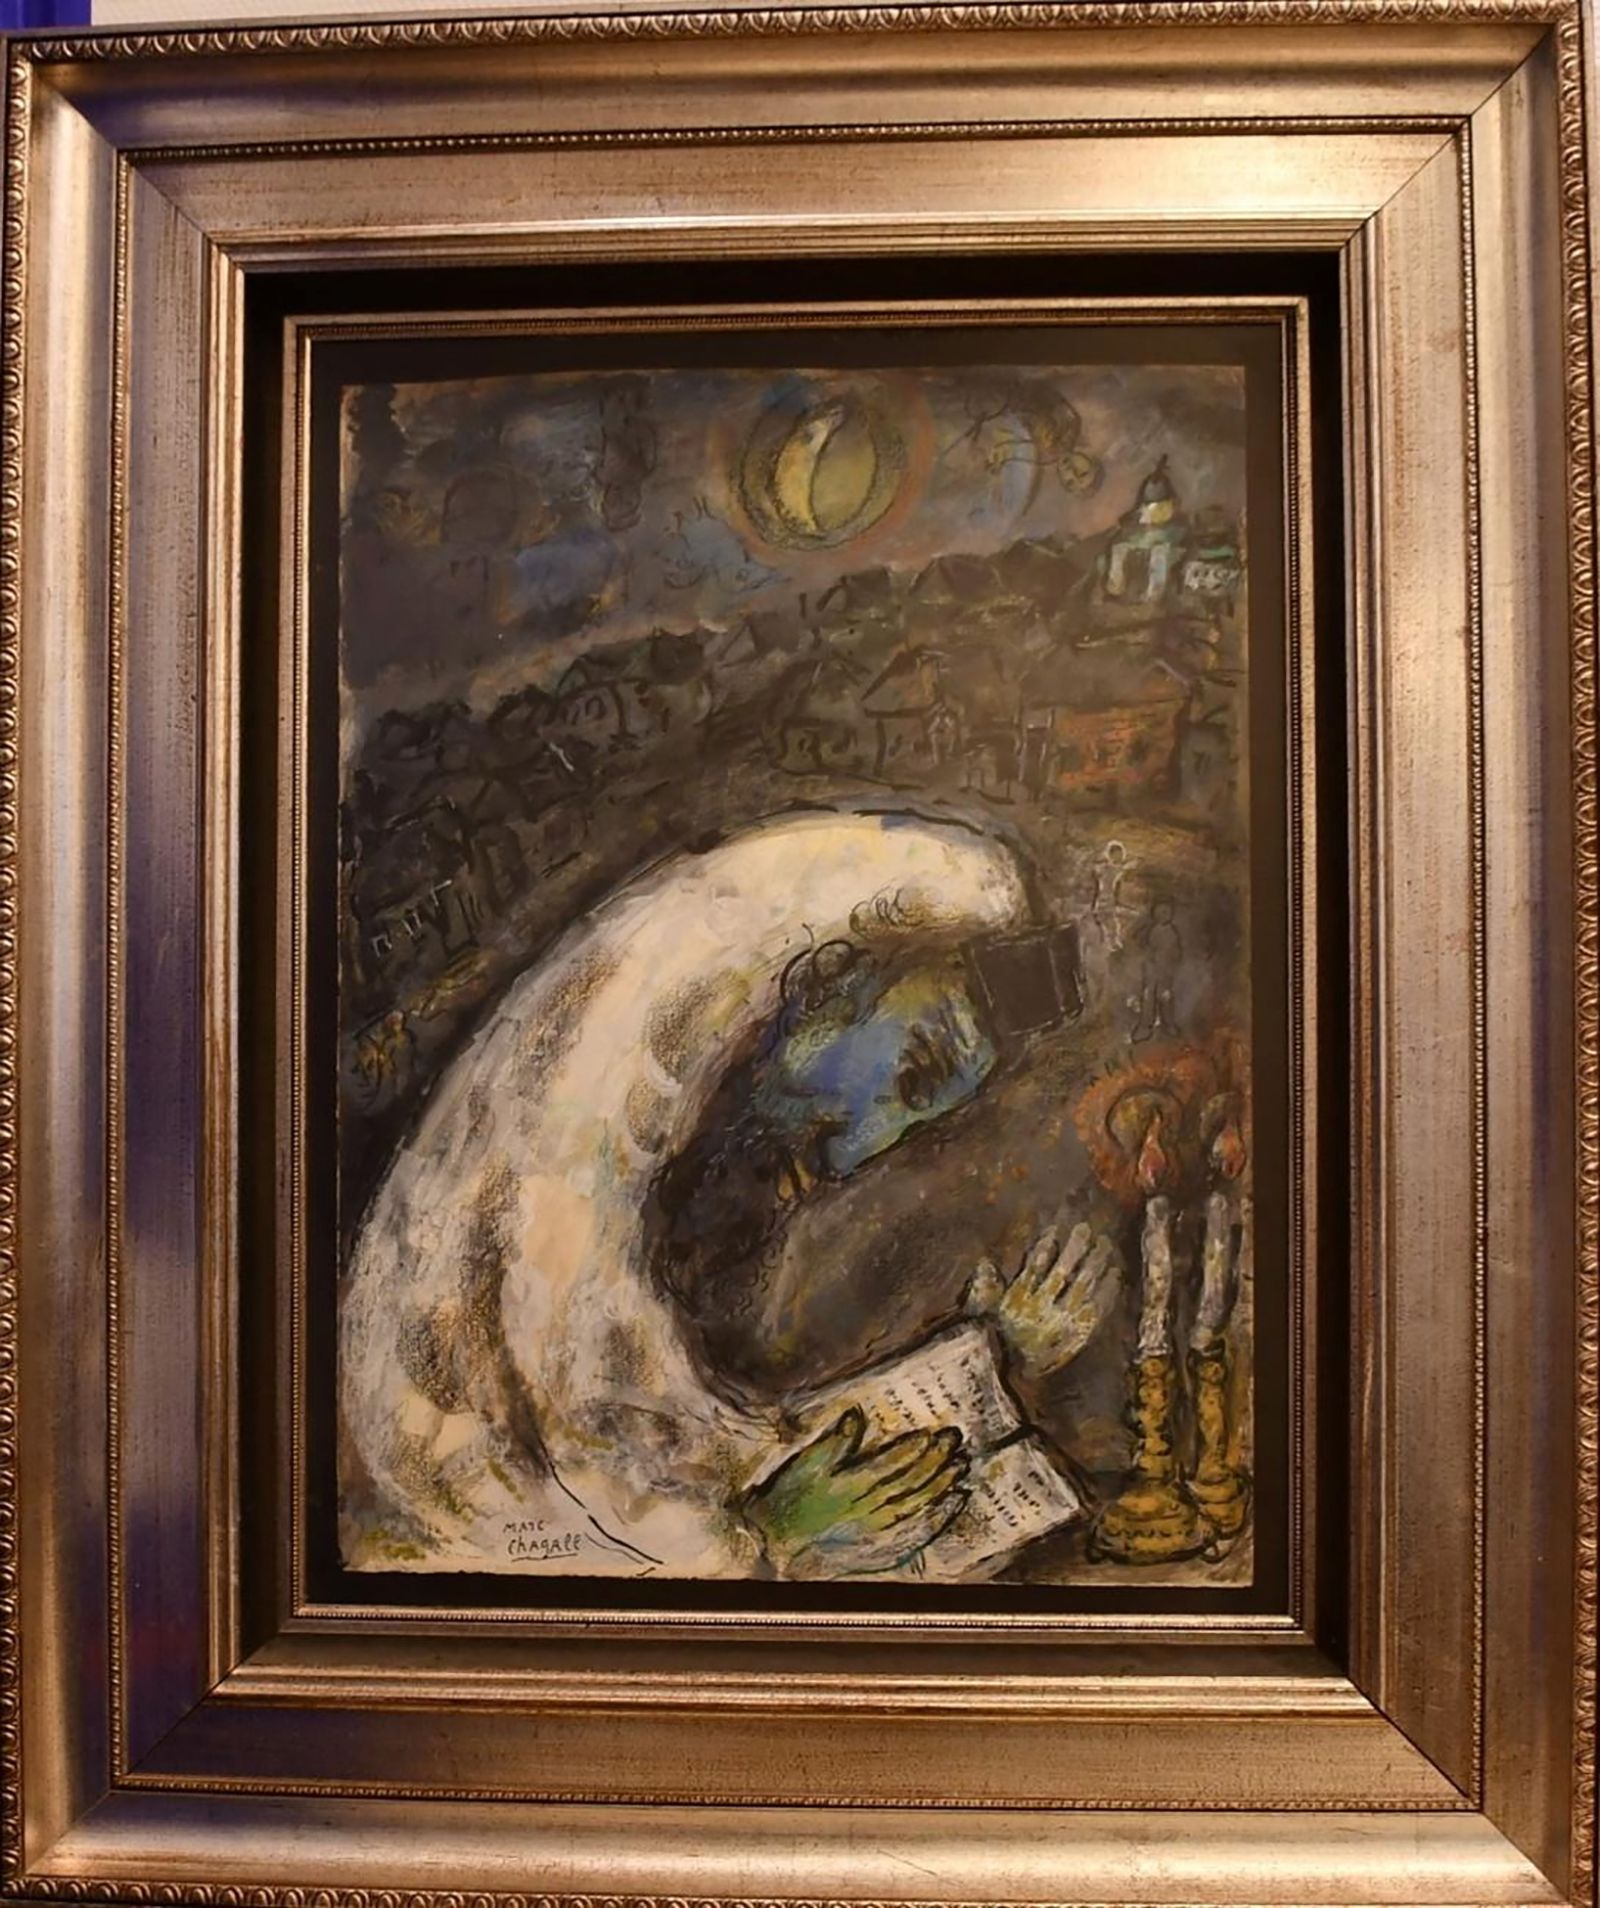 The painting 'L'homme en priere' by Marc Chagall stolen fourteen years ago from Israel and found in Belgium is seen in this undated handout image. Parquet of Namur/Handout via REUTERS    THIS IMAGE HAS BEEN SUPPLIED BY A THIRD PARTY. NO RESALES. NO ARCHIVES